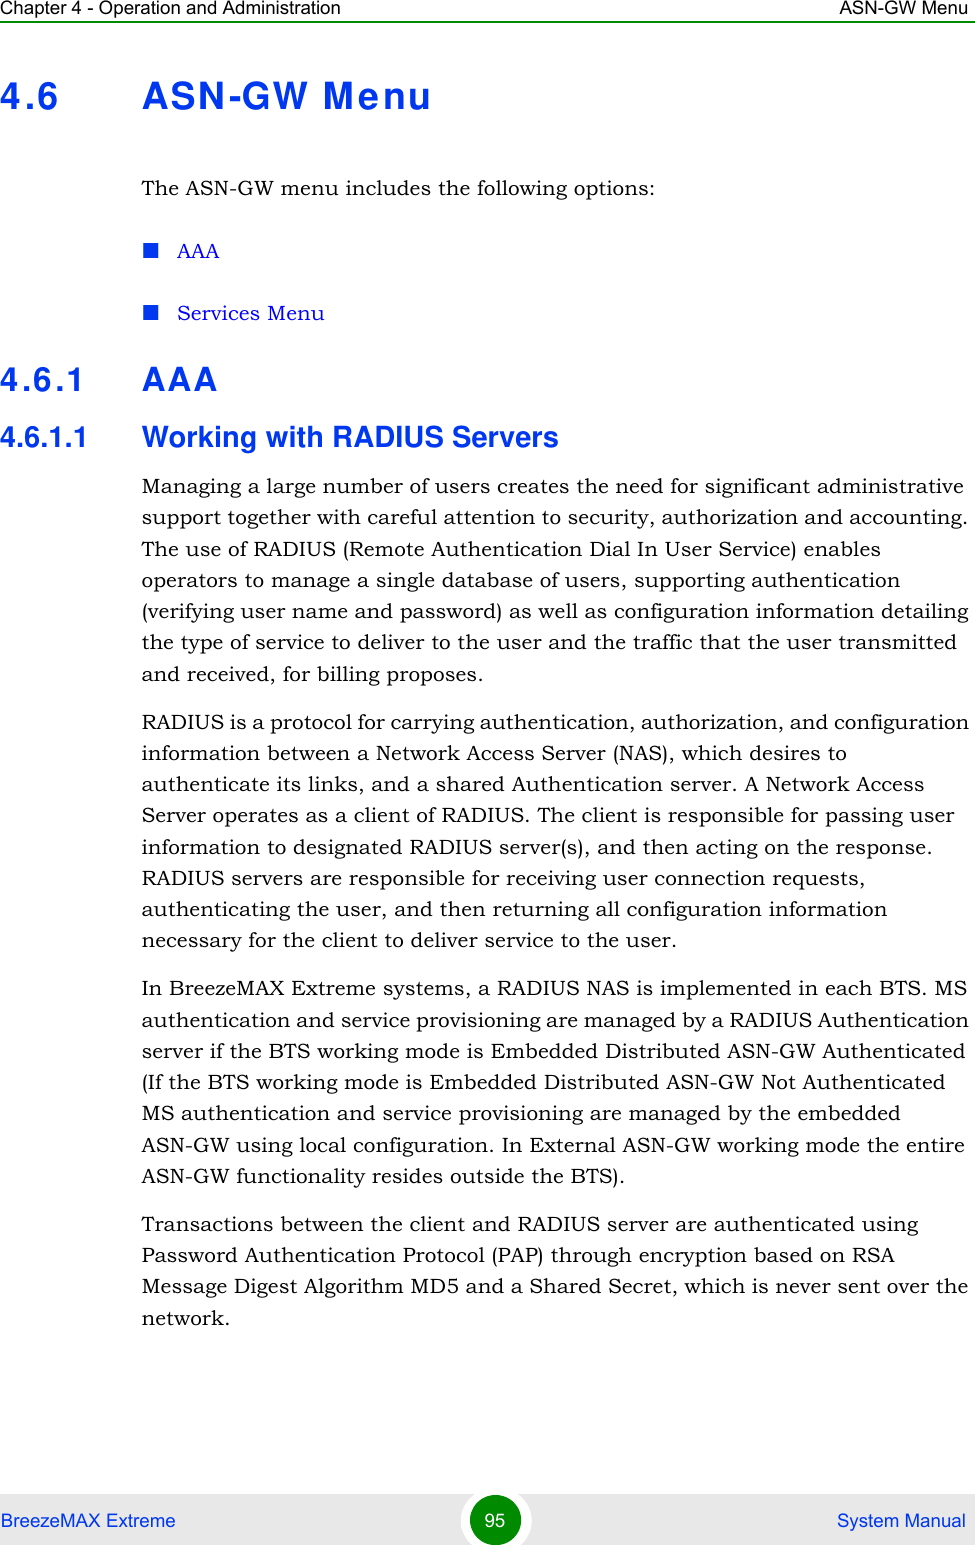 Chapter 4 - Operation and Administration ASN-GW MenuBreezeMAX Extreme 95  System Manual4.6 ASN-GW MenuThe ASN-GW menu includes the following options:AAAServices Menu4.6.1 AAA4.6.1.1 Working with RADIUS ServersManaging a large number of users creates the need for significant administrative support together with careful attention to security, authorization and accounting. The use of RADIUS (Remote Authentication Dial In User Service) enables operators to manage a single database of users, supporting authentication (verifying user name and password) as well as configuration information detailing the type of service to deliver to the user and the traffic that the user transmitted and received, for billing proposes.RADIUS is a protocol for carrying authentication, authorization, and configuration information between a Network Access Server (NAS), which desires to authenticate its links, and a shared Authentication server. A Network Access Server operates as a client of RADIUS. The client is responsible for passing user information to designated RADIUS server(s), and then acting on the response. RADIUS servers are responsible for receiving user connection requests, authenticating the user, and then returning all configuration information necessary for the client to deliver service to the user. In BreezeMAX Extreme systems, a RADIUS NAS is implemented in each BTS. MS authentication and service provisioning are managed by a RADIUS Authentication server if the BTS working mode is Embedded Distributed ASN-GW Authenticated (If the BTS working mode is Embedded Distributed ASN-GW Not Authenticated MS authentication and service provisioning are managed by the embedded ASN-GW using local configuration. In External ASN-GW working mode the entire ASN-GW functionality resides outside the BTS).Transactions between the client and RADIUS server are authenticated using Password Authentication Protocol (PAP) through encryption based on RSA Message Digest Algorithm MD5 and a Shared Secret, which is never sent over the network.